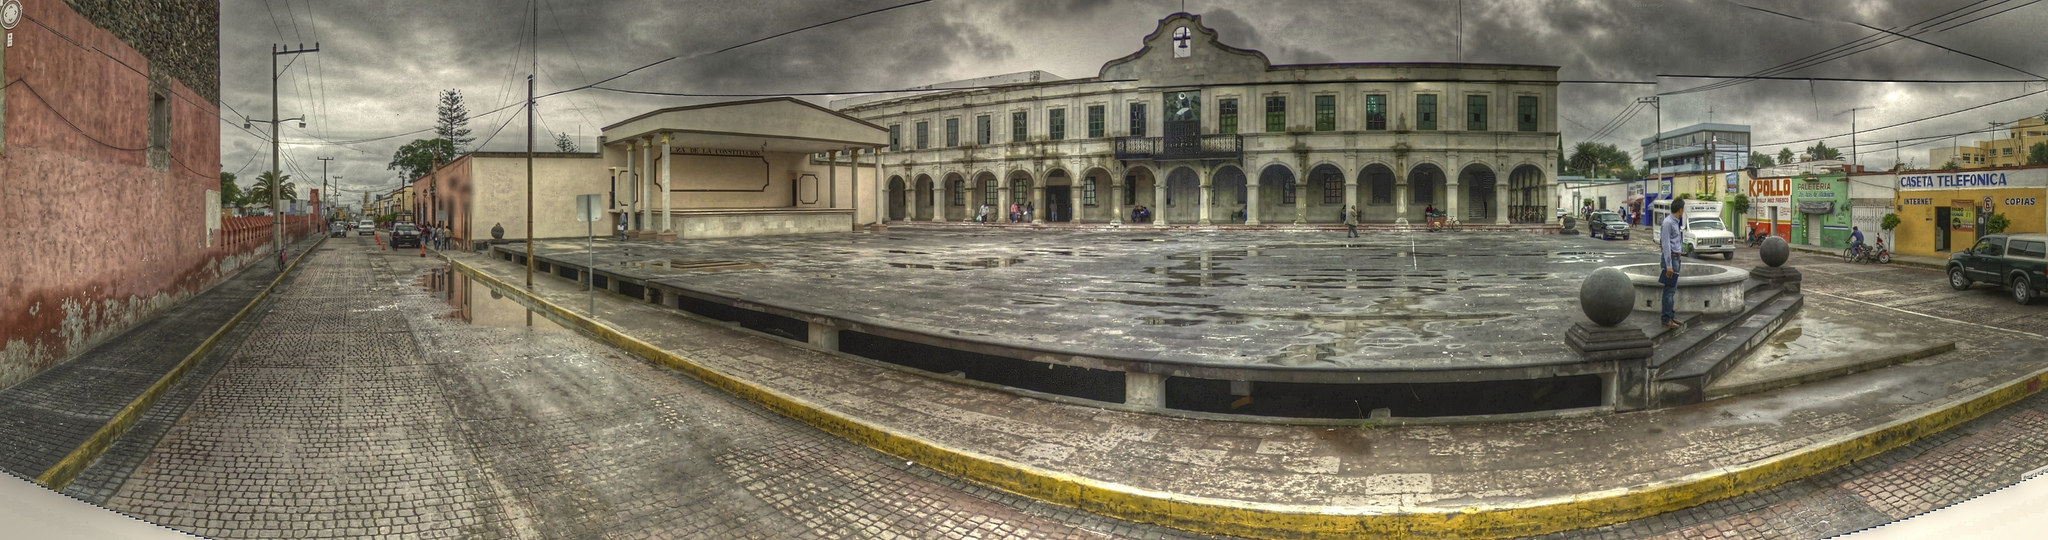 town-square-in-actopan-hildago-mexico-by-kevin-dooley-via-flickr